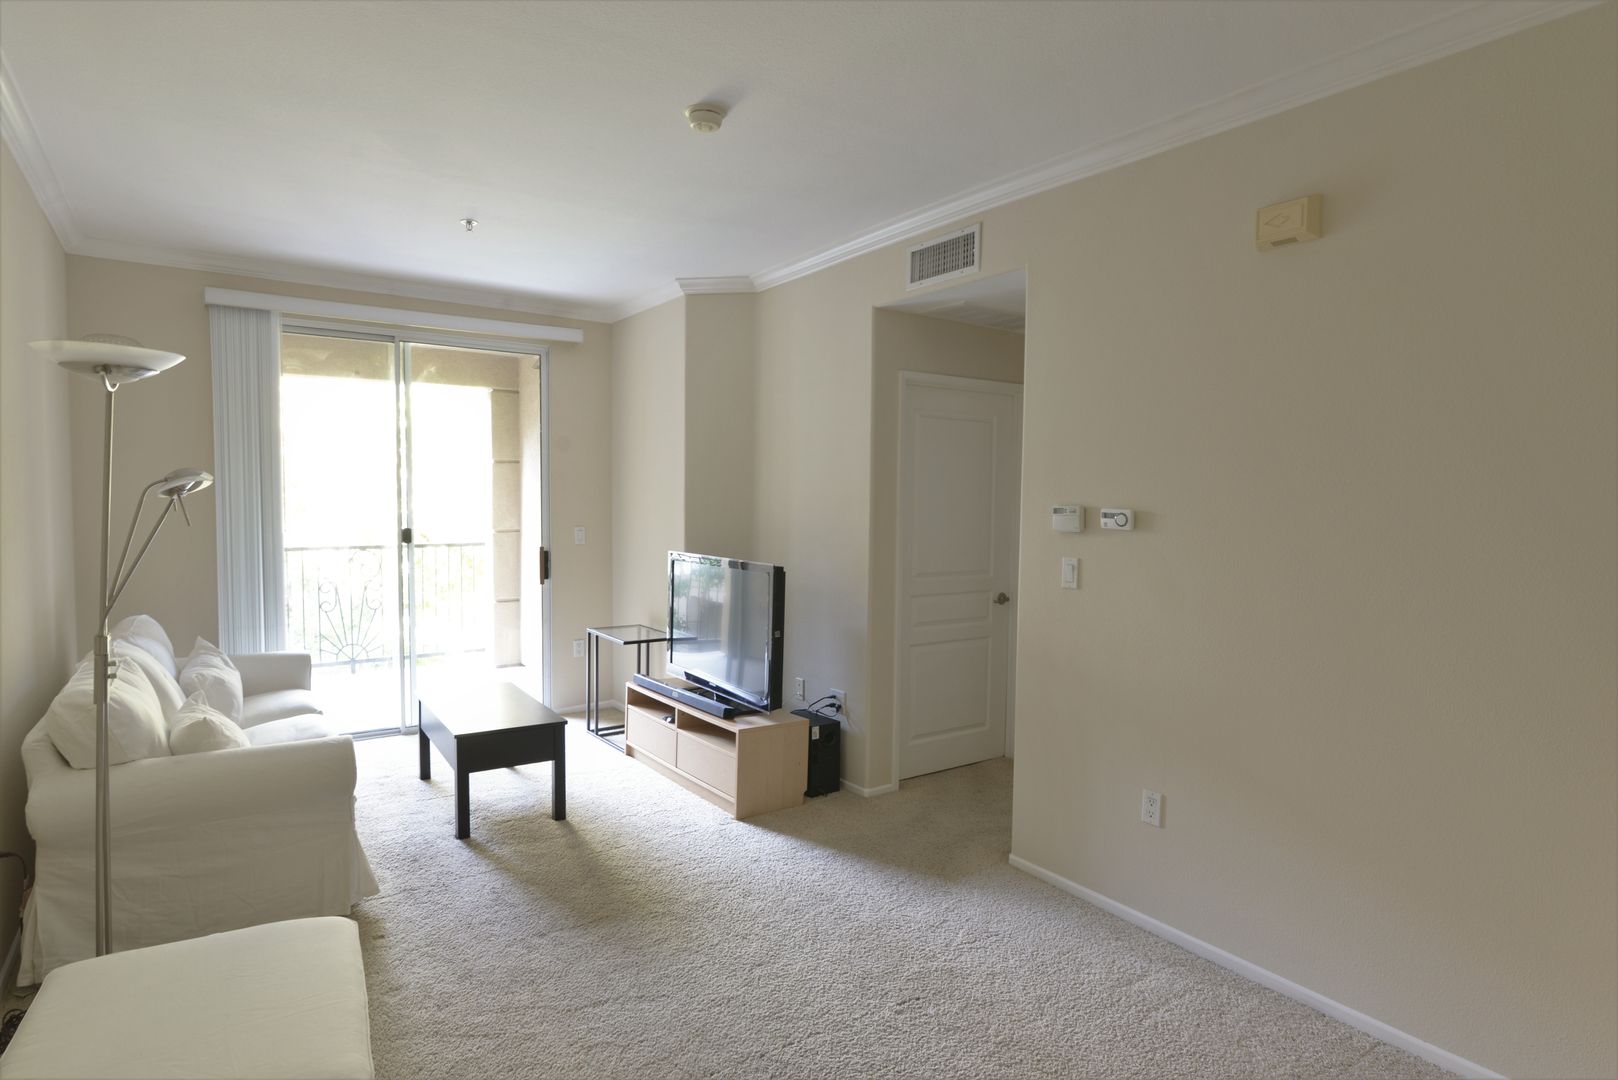 Charming 1 Bed 1 Bath Available Now in the Watermarke Community!